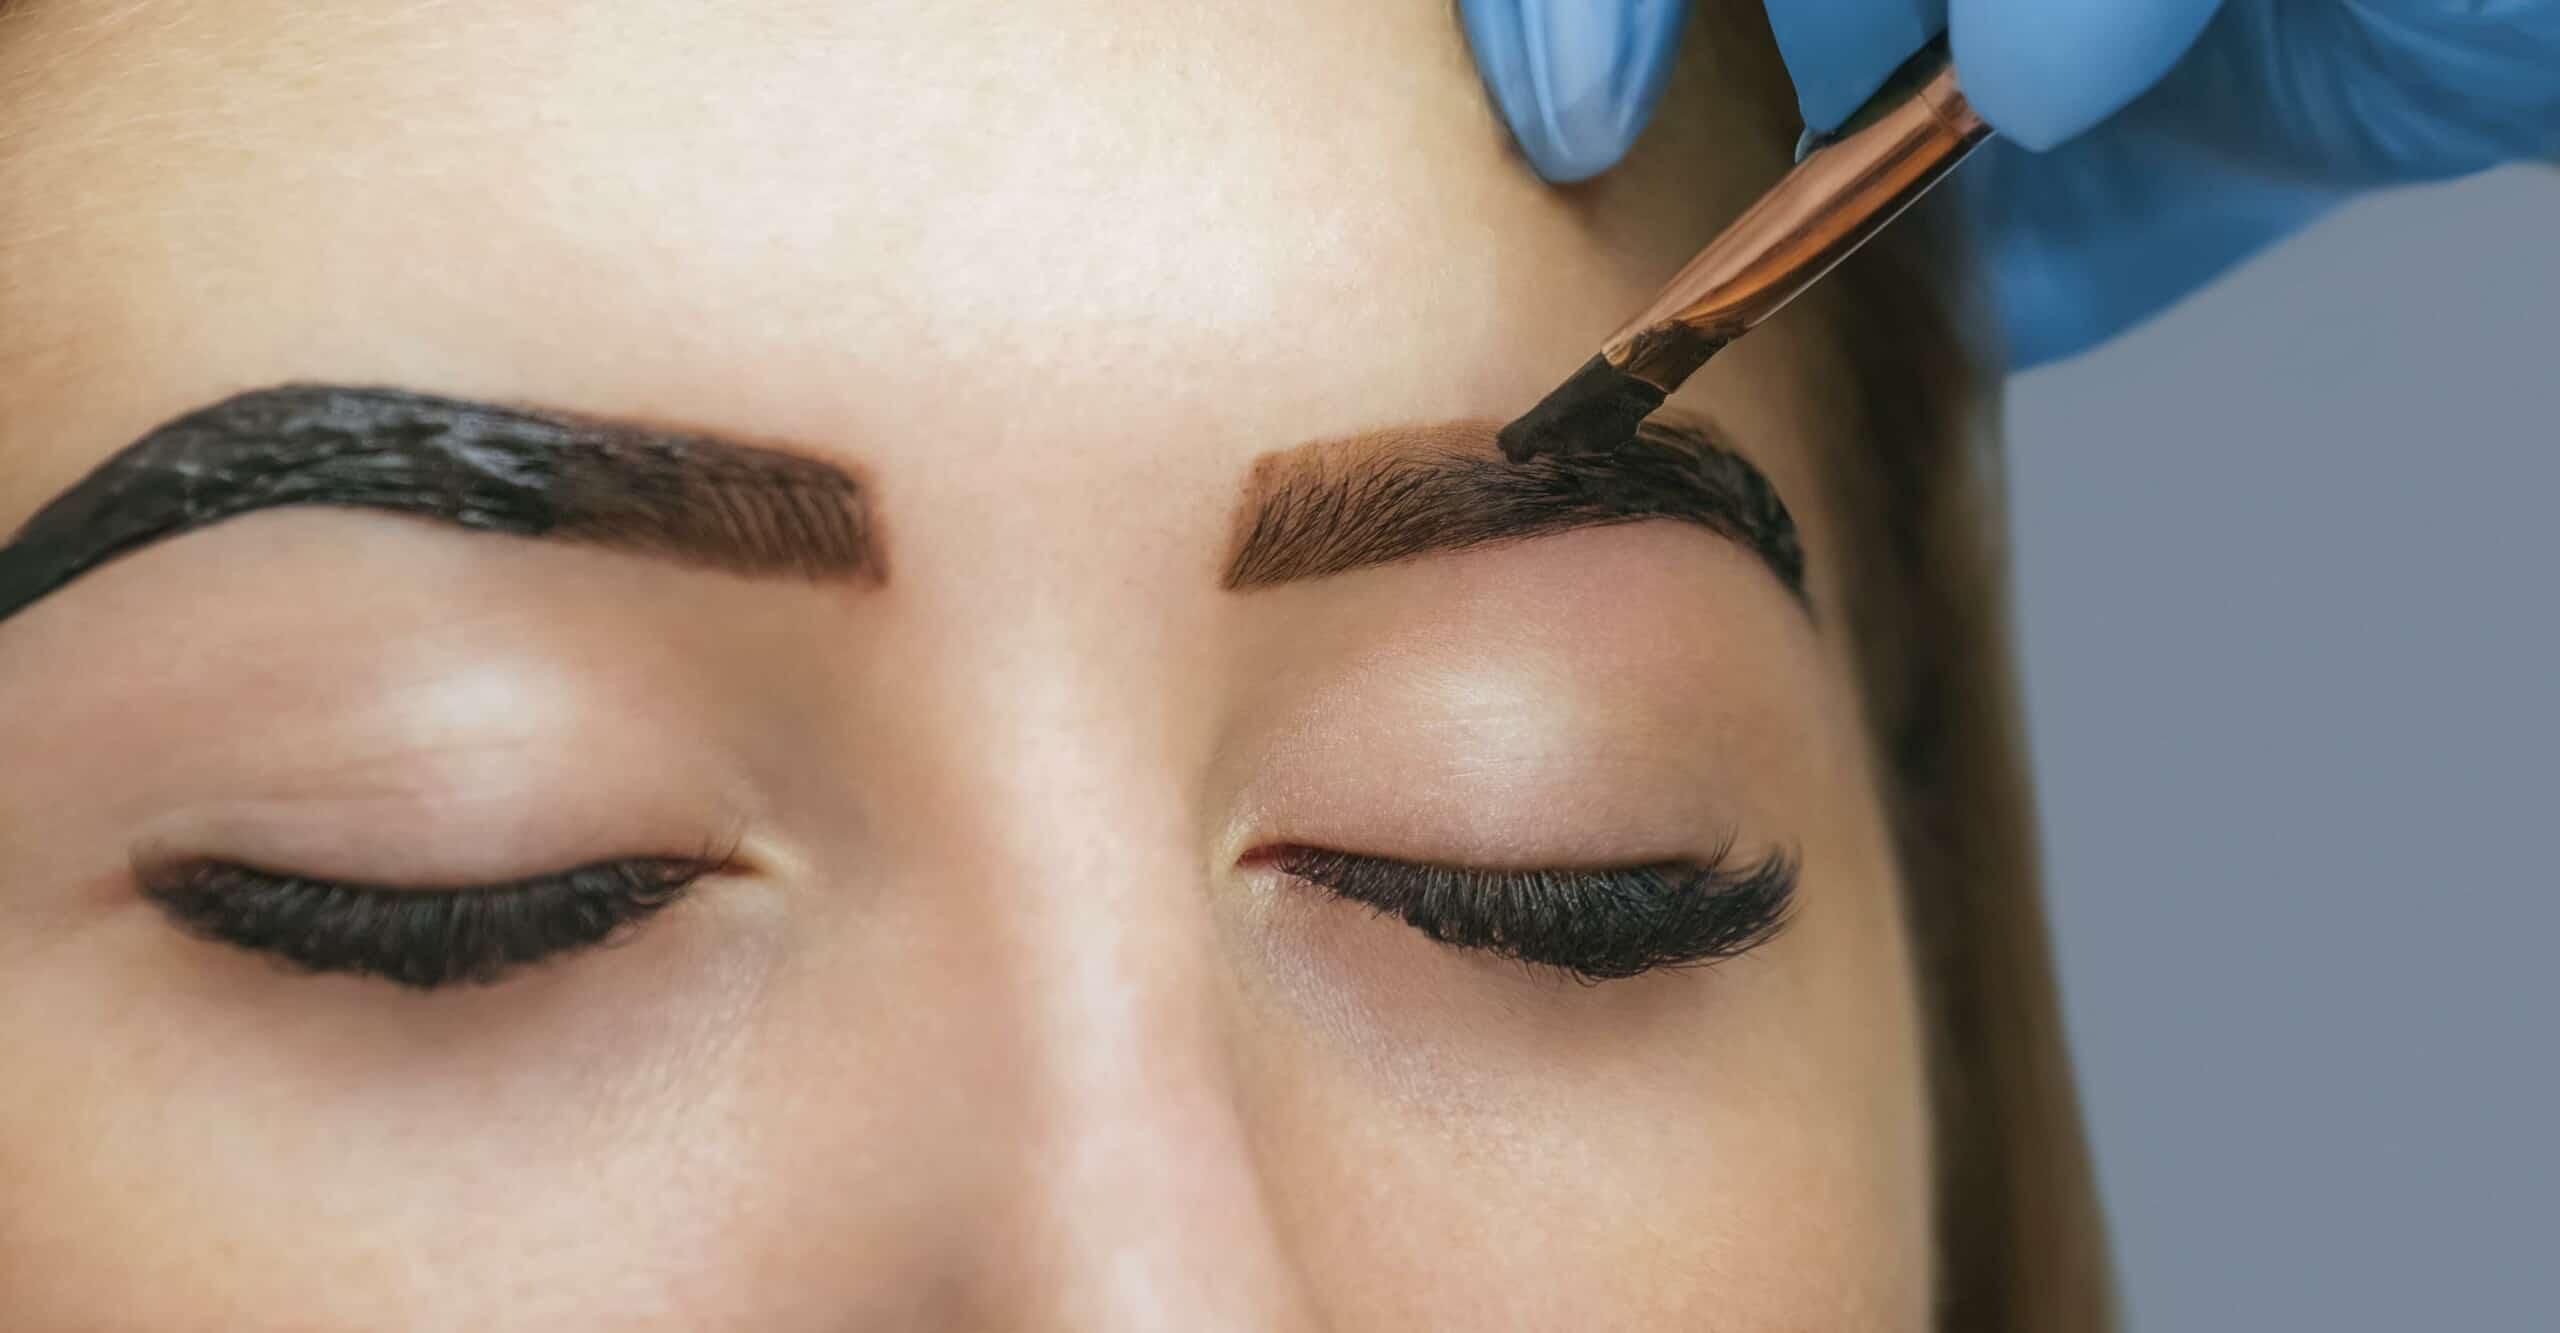 Eyebrow Tinting Guide for First-Timers - StyleSeat